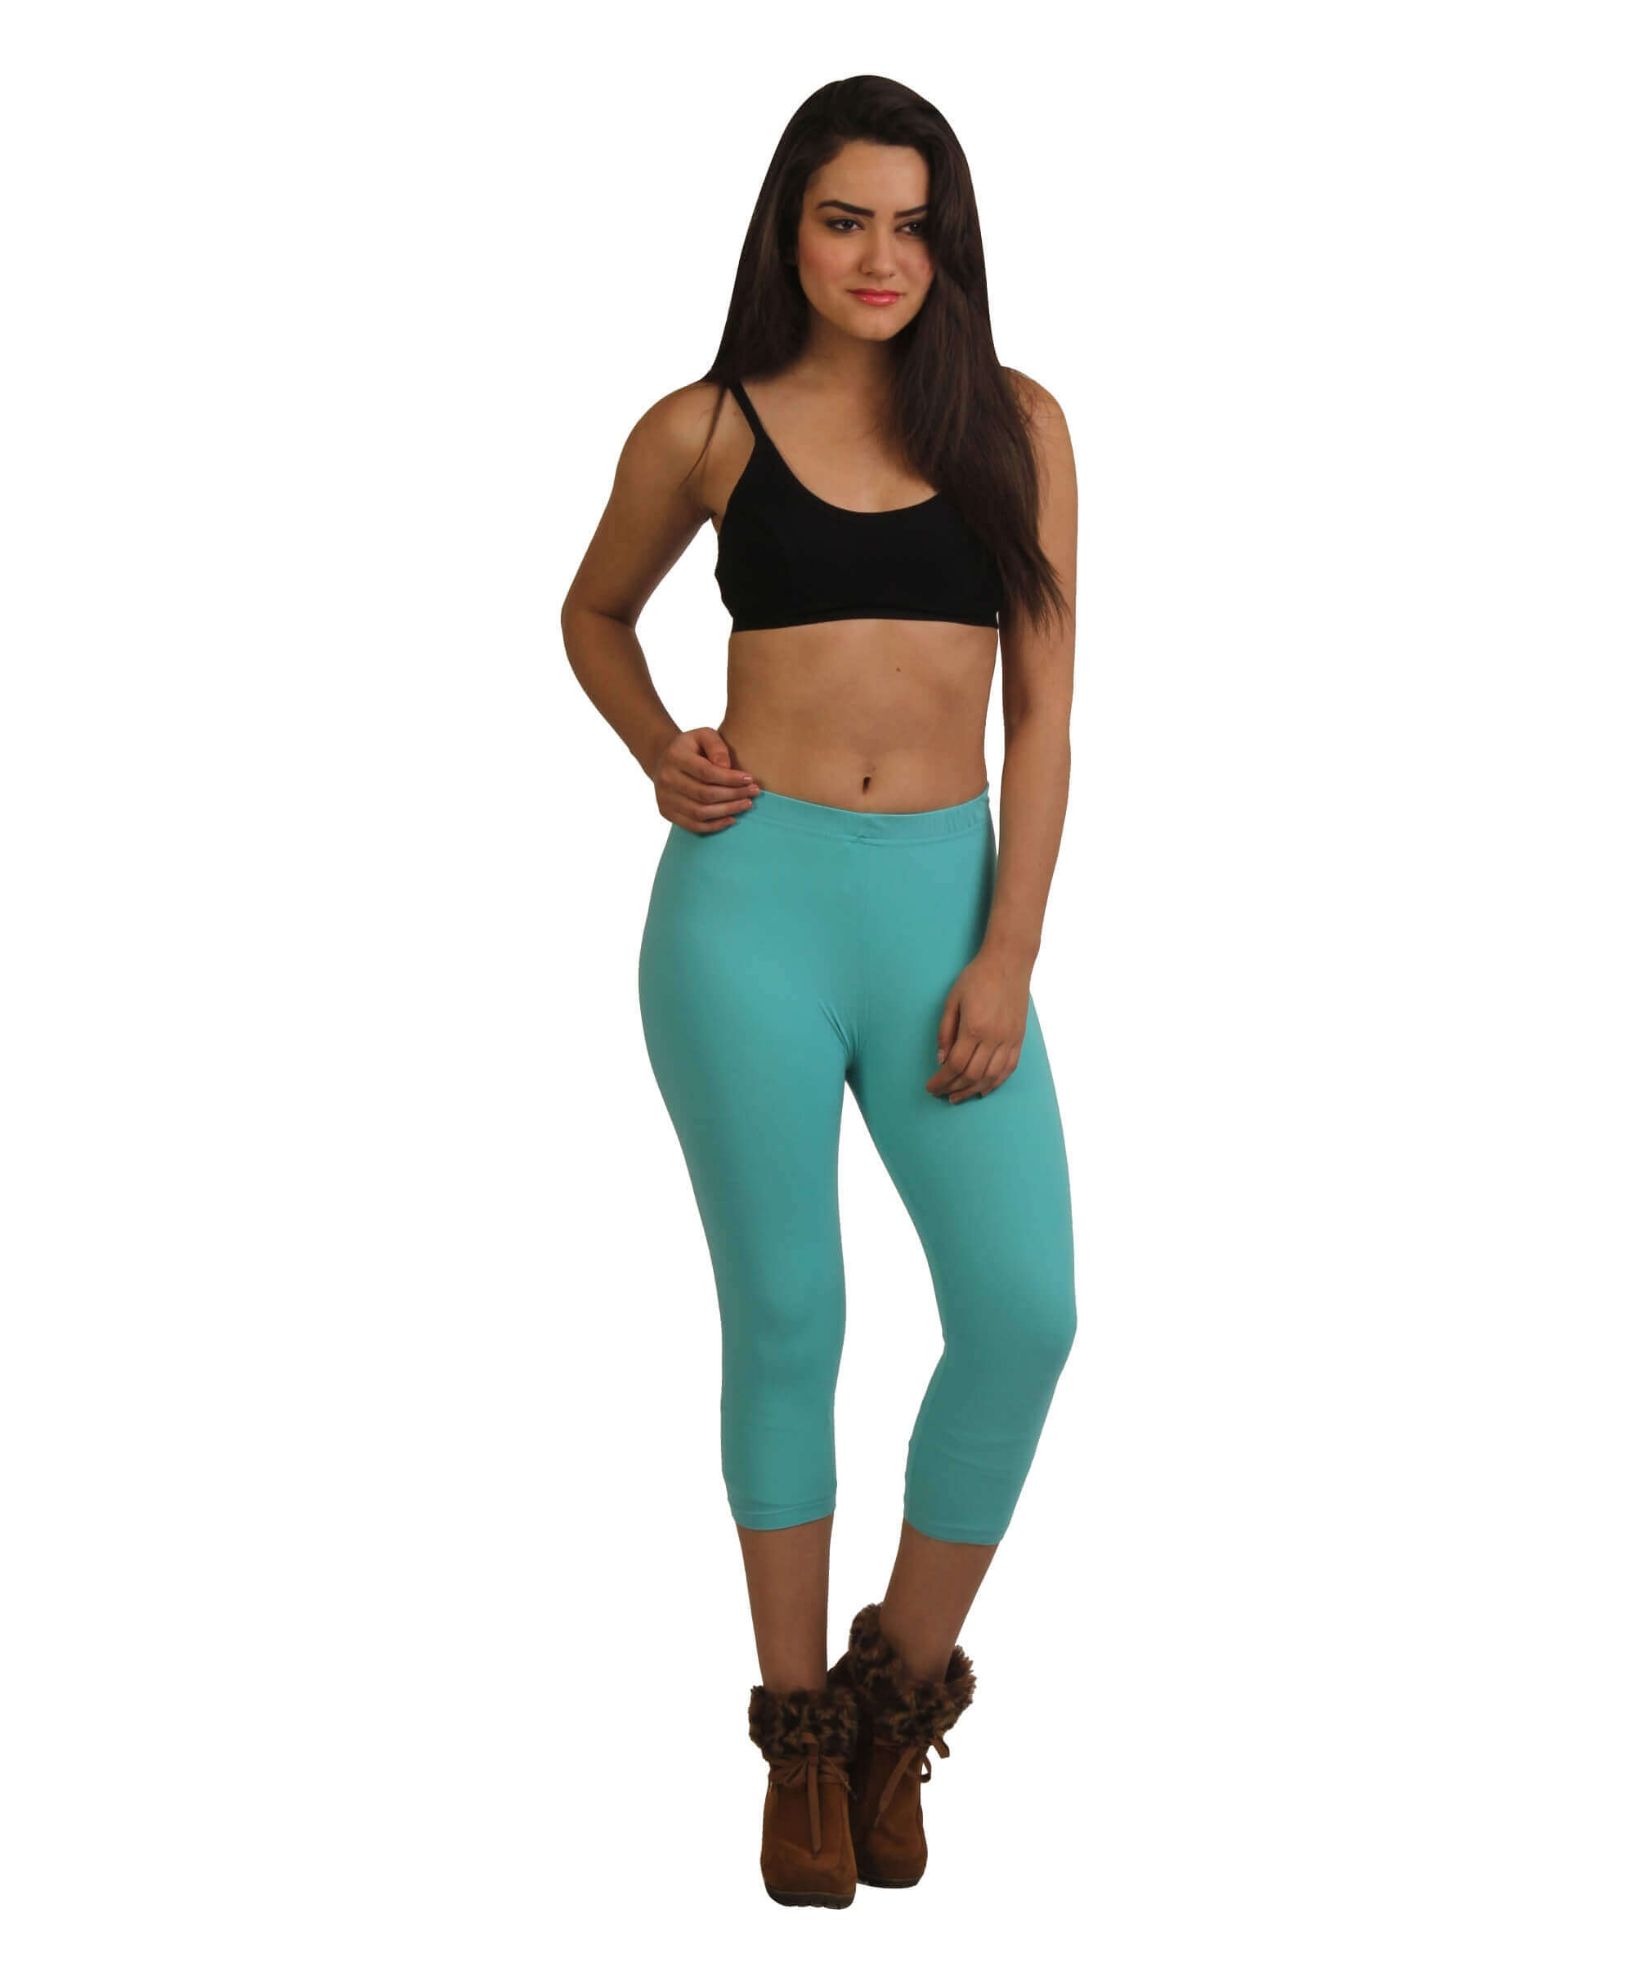 Buy Frenchtrendz Womens's Cotton Spandex Capris Pull On (Aqua, X-Small) at